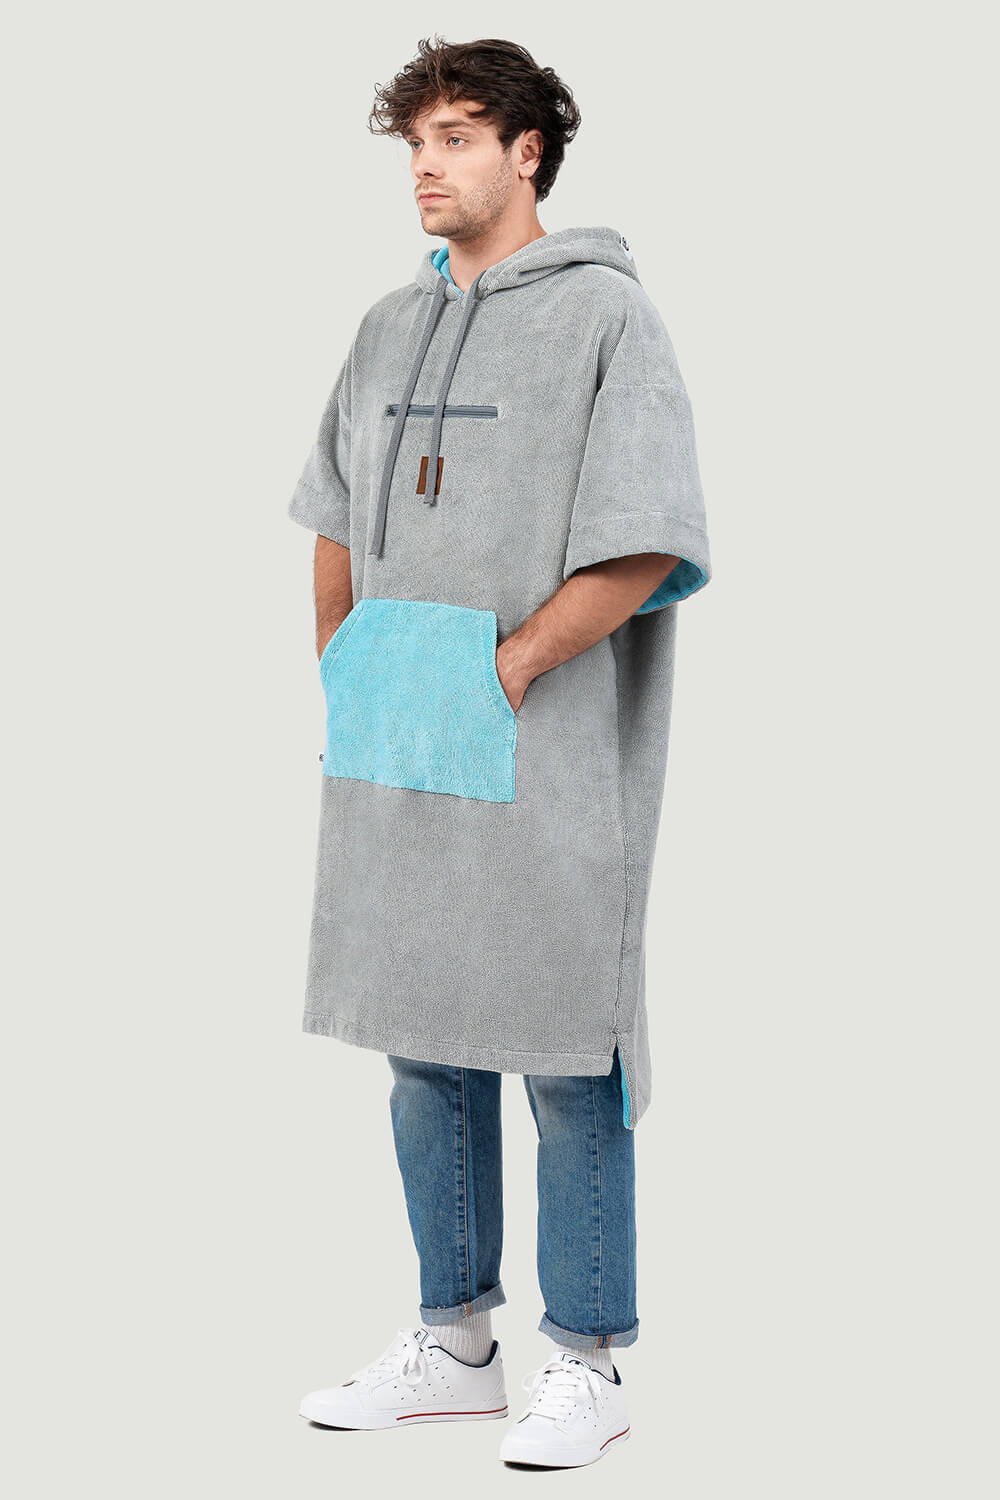 frost-poncho-guy-front